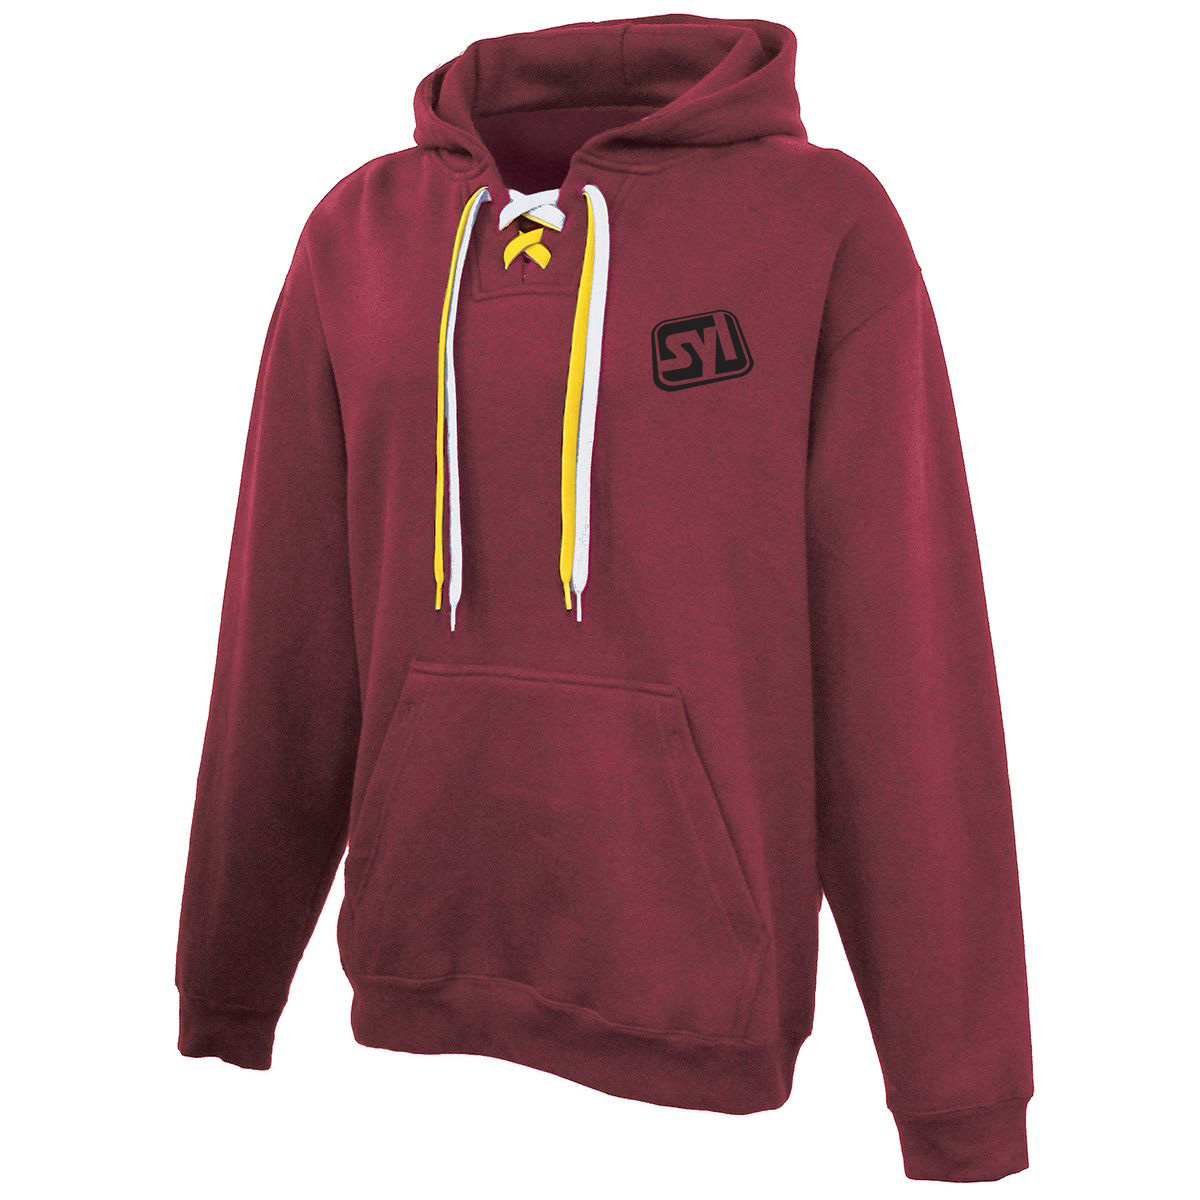 Faceoff Hoodie - Show Your Logo